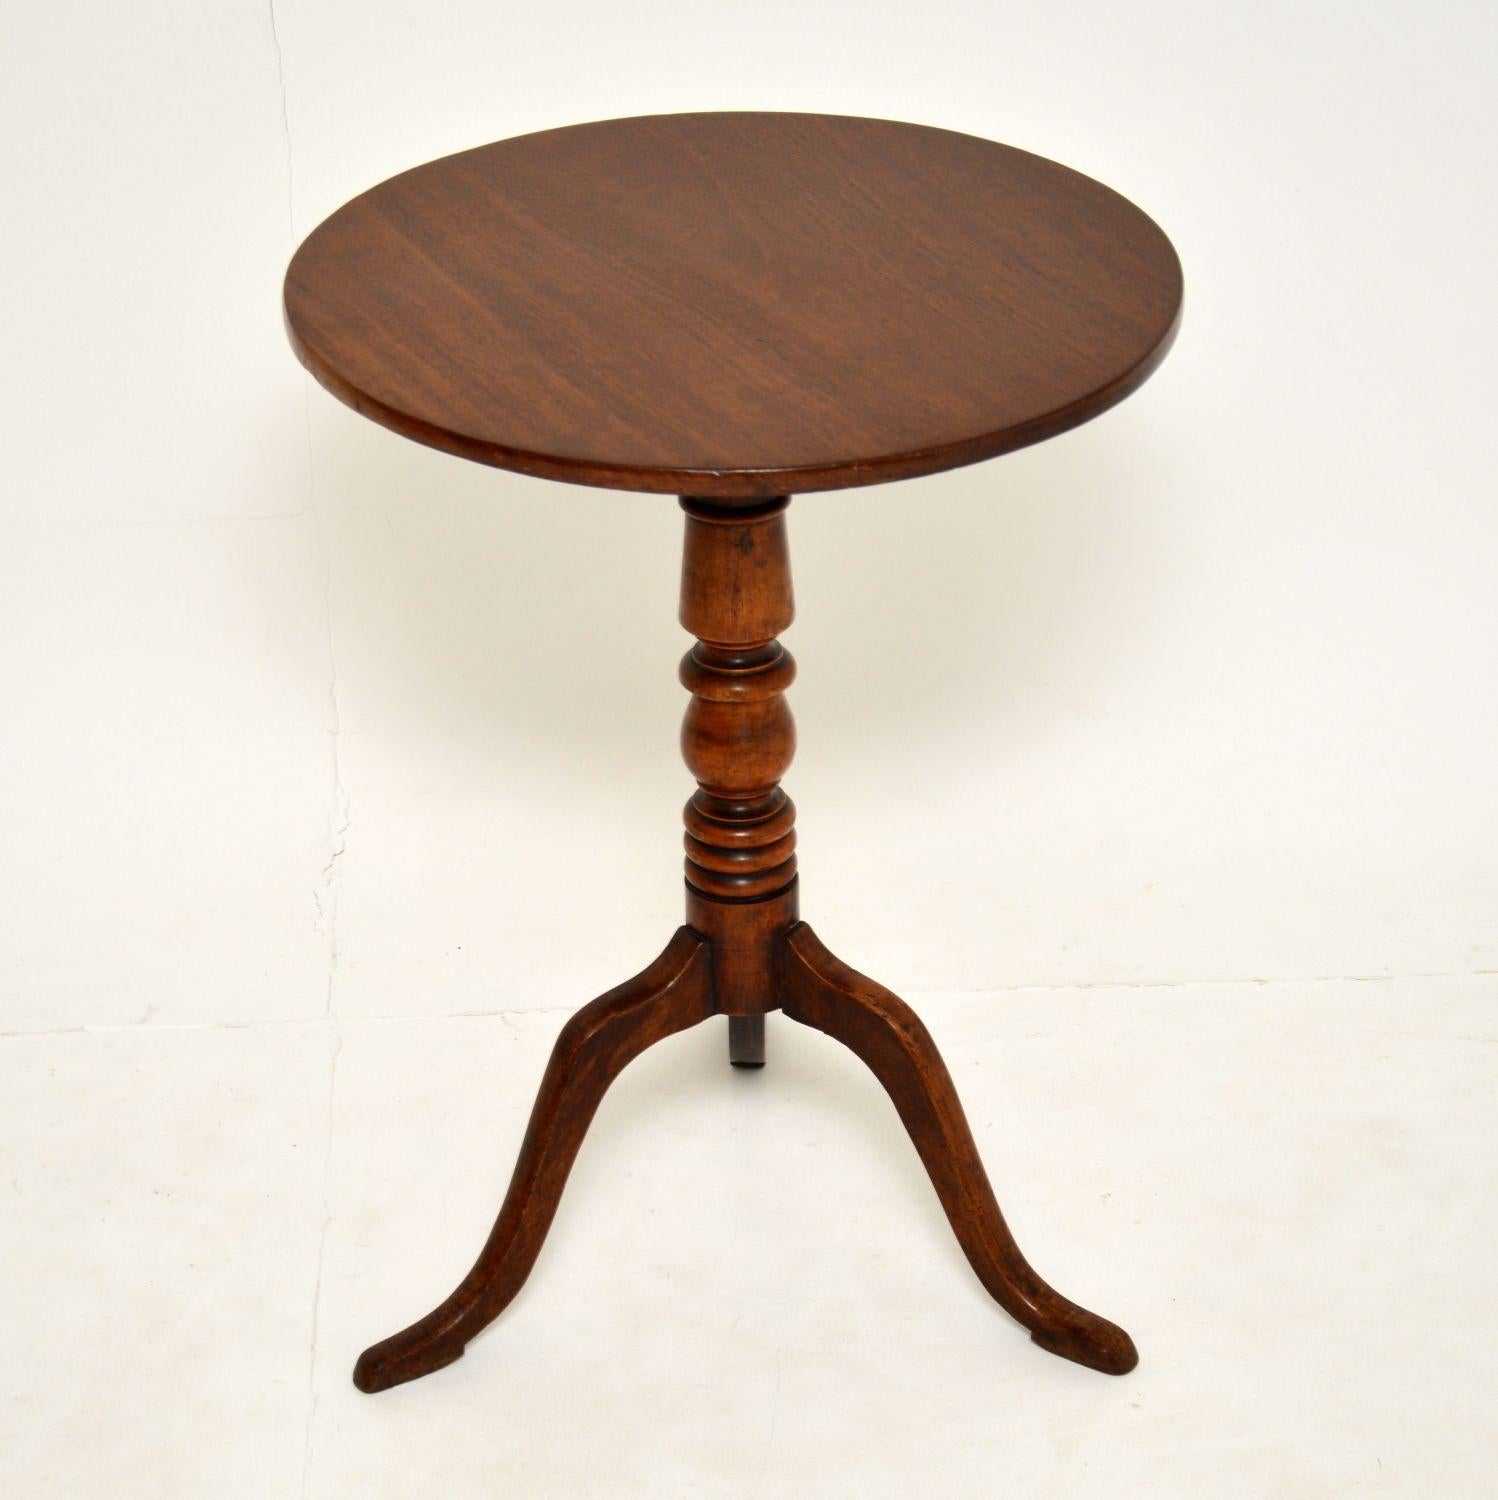 A beautiful and elegant antique tripod based tilt-top table in solid mahogany. This dates from the George III period, circa 1790-1810.

It is very fine quality with a lovely splayed tripod base and turned central column.

We have had this